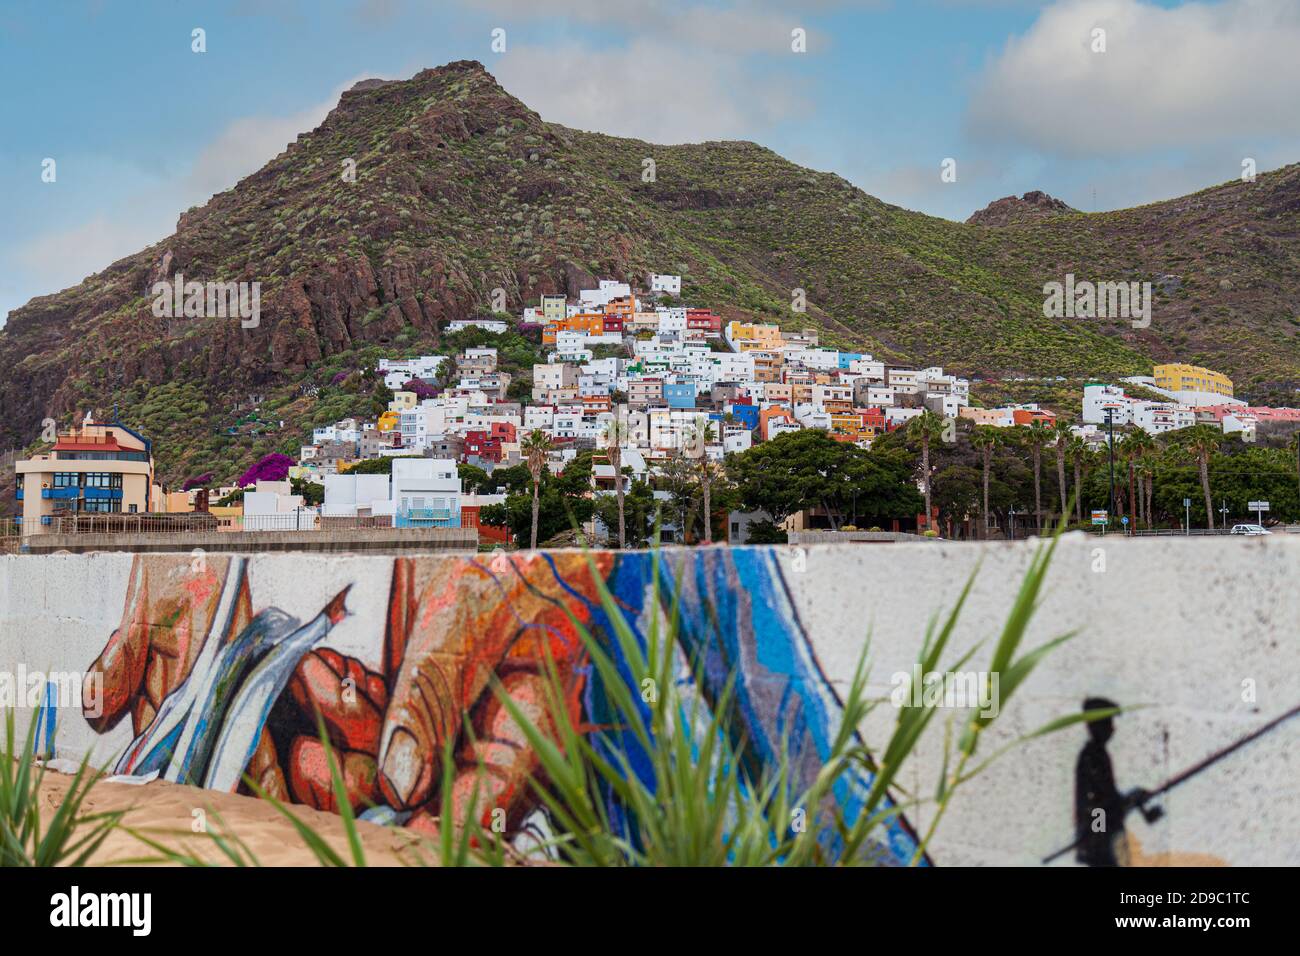 San Andrés is a village located on the island of Tenerife in the Canary Islands. It is located on the coast, at the foot of the Anaga mountains Stock Photo